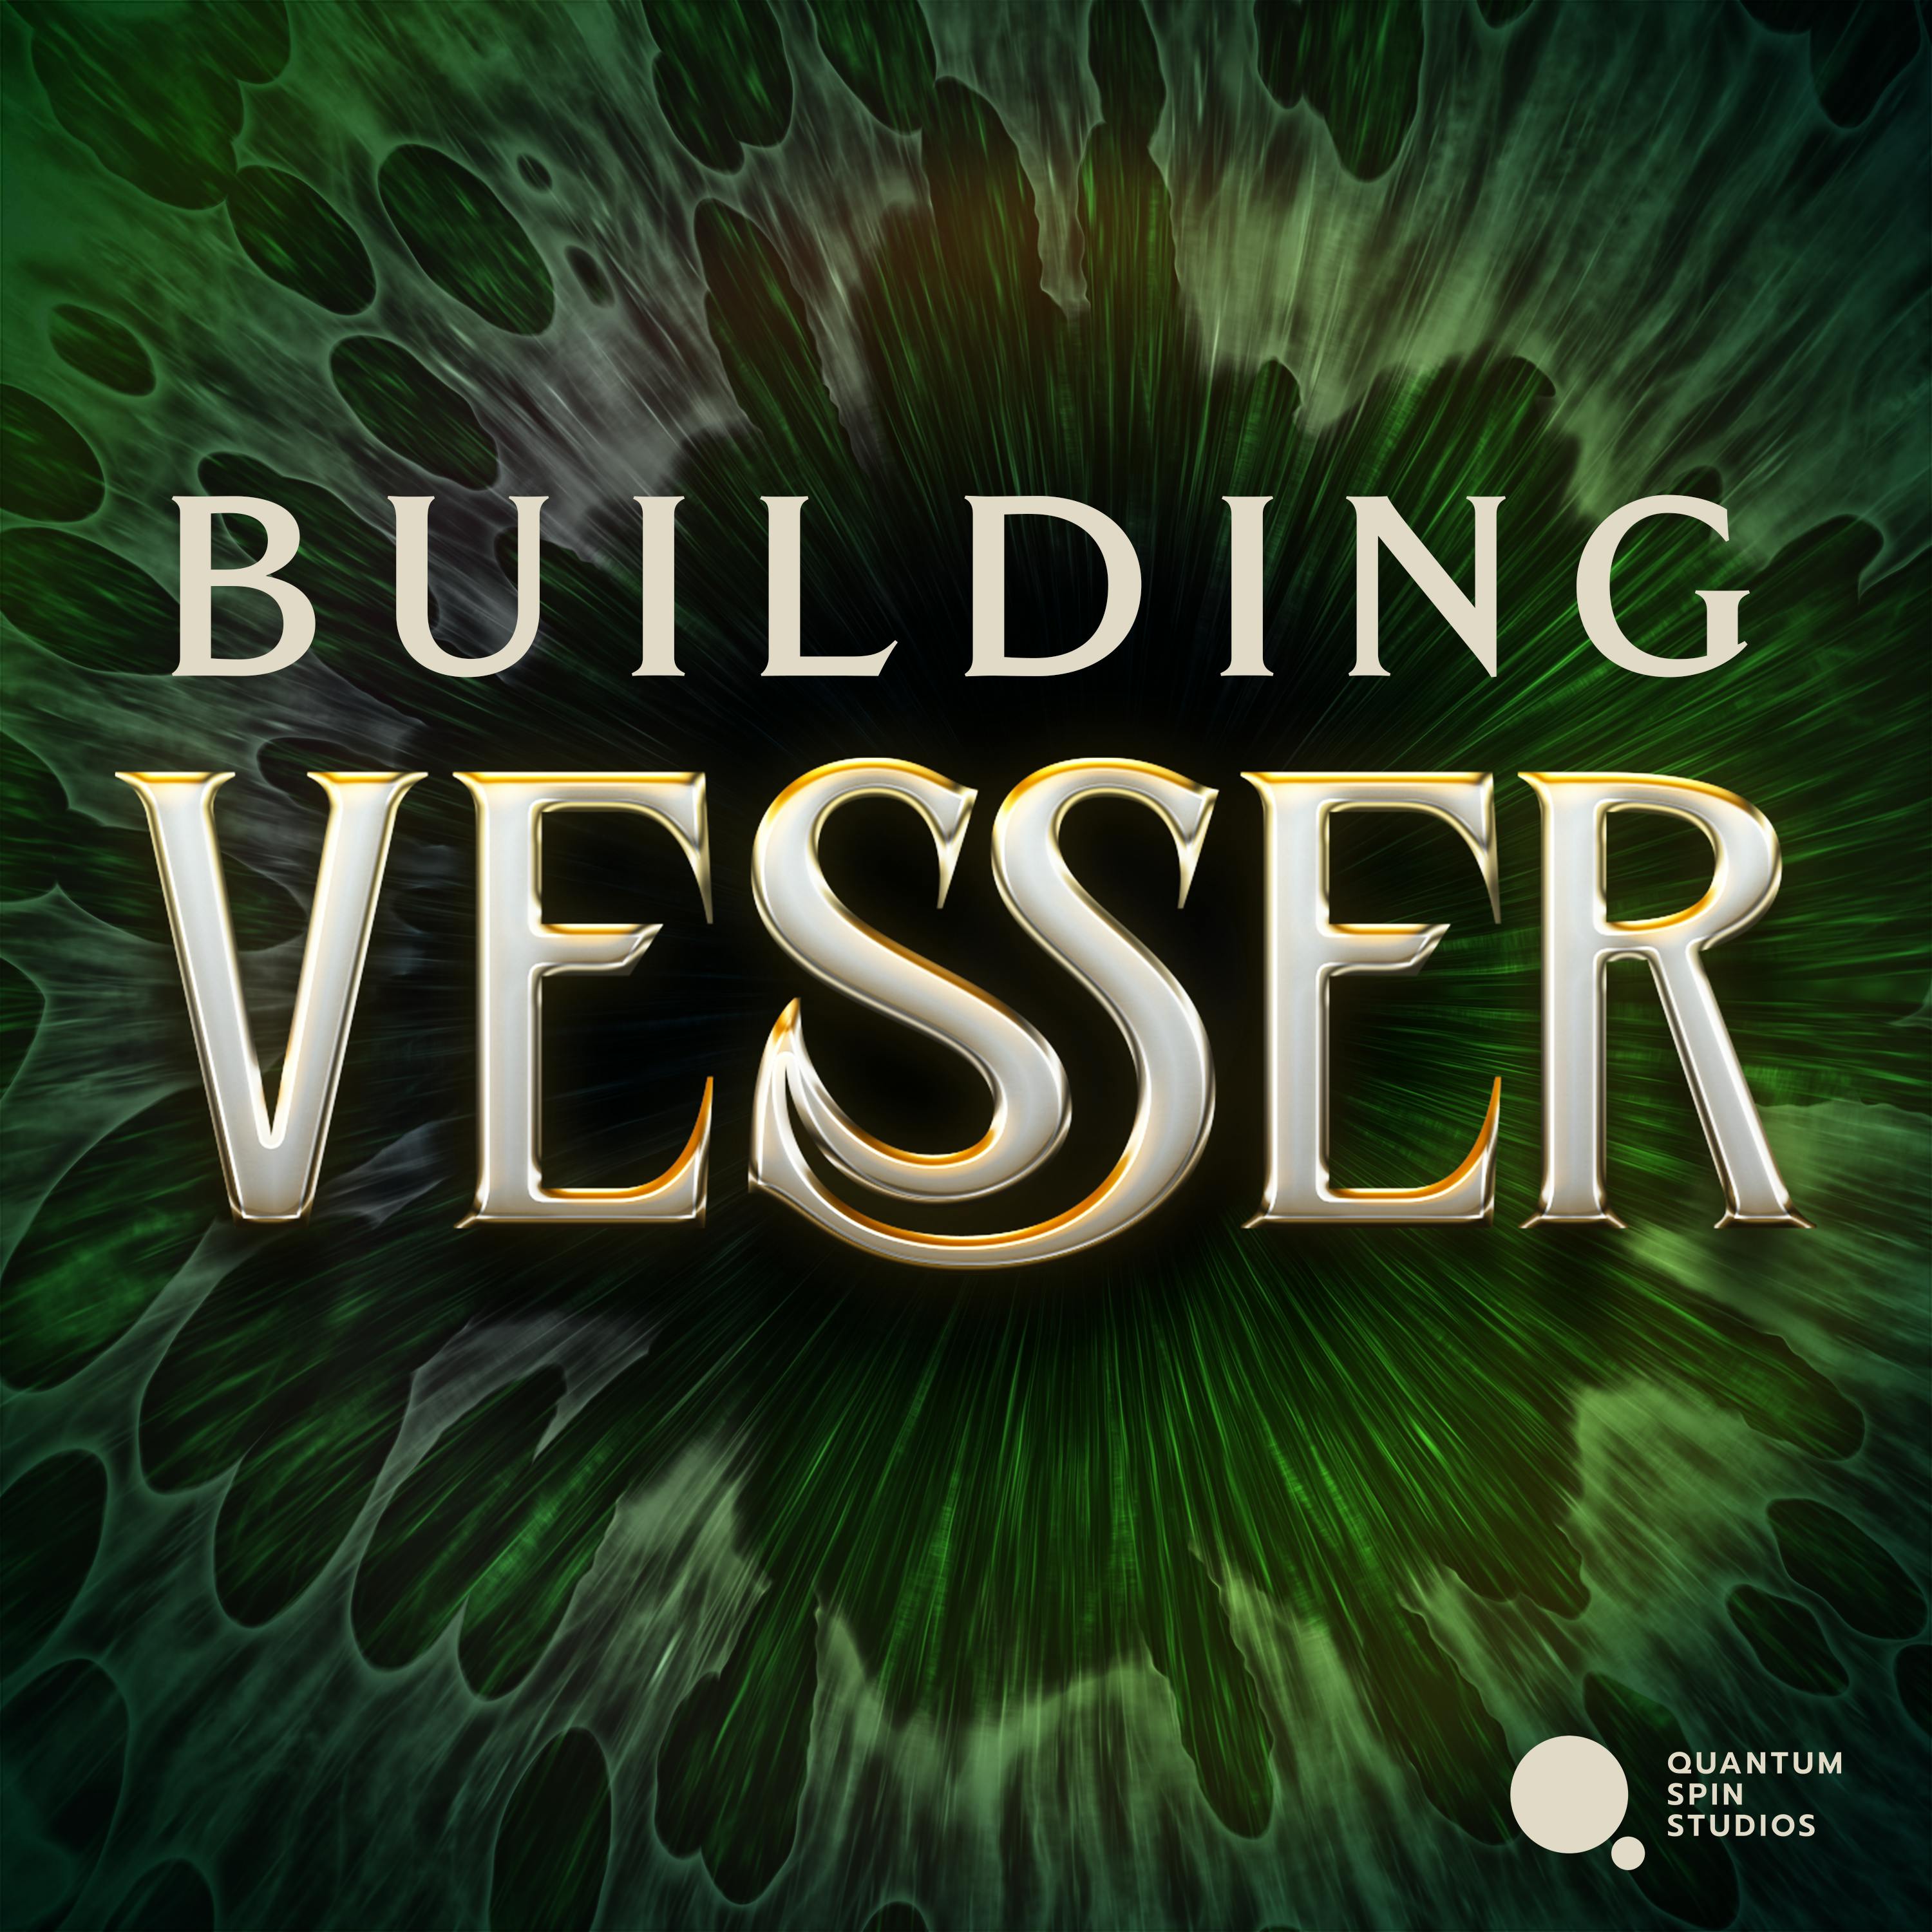 Building Vesser: The First Story (read by Mike McHargue)